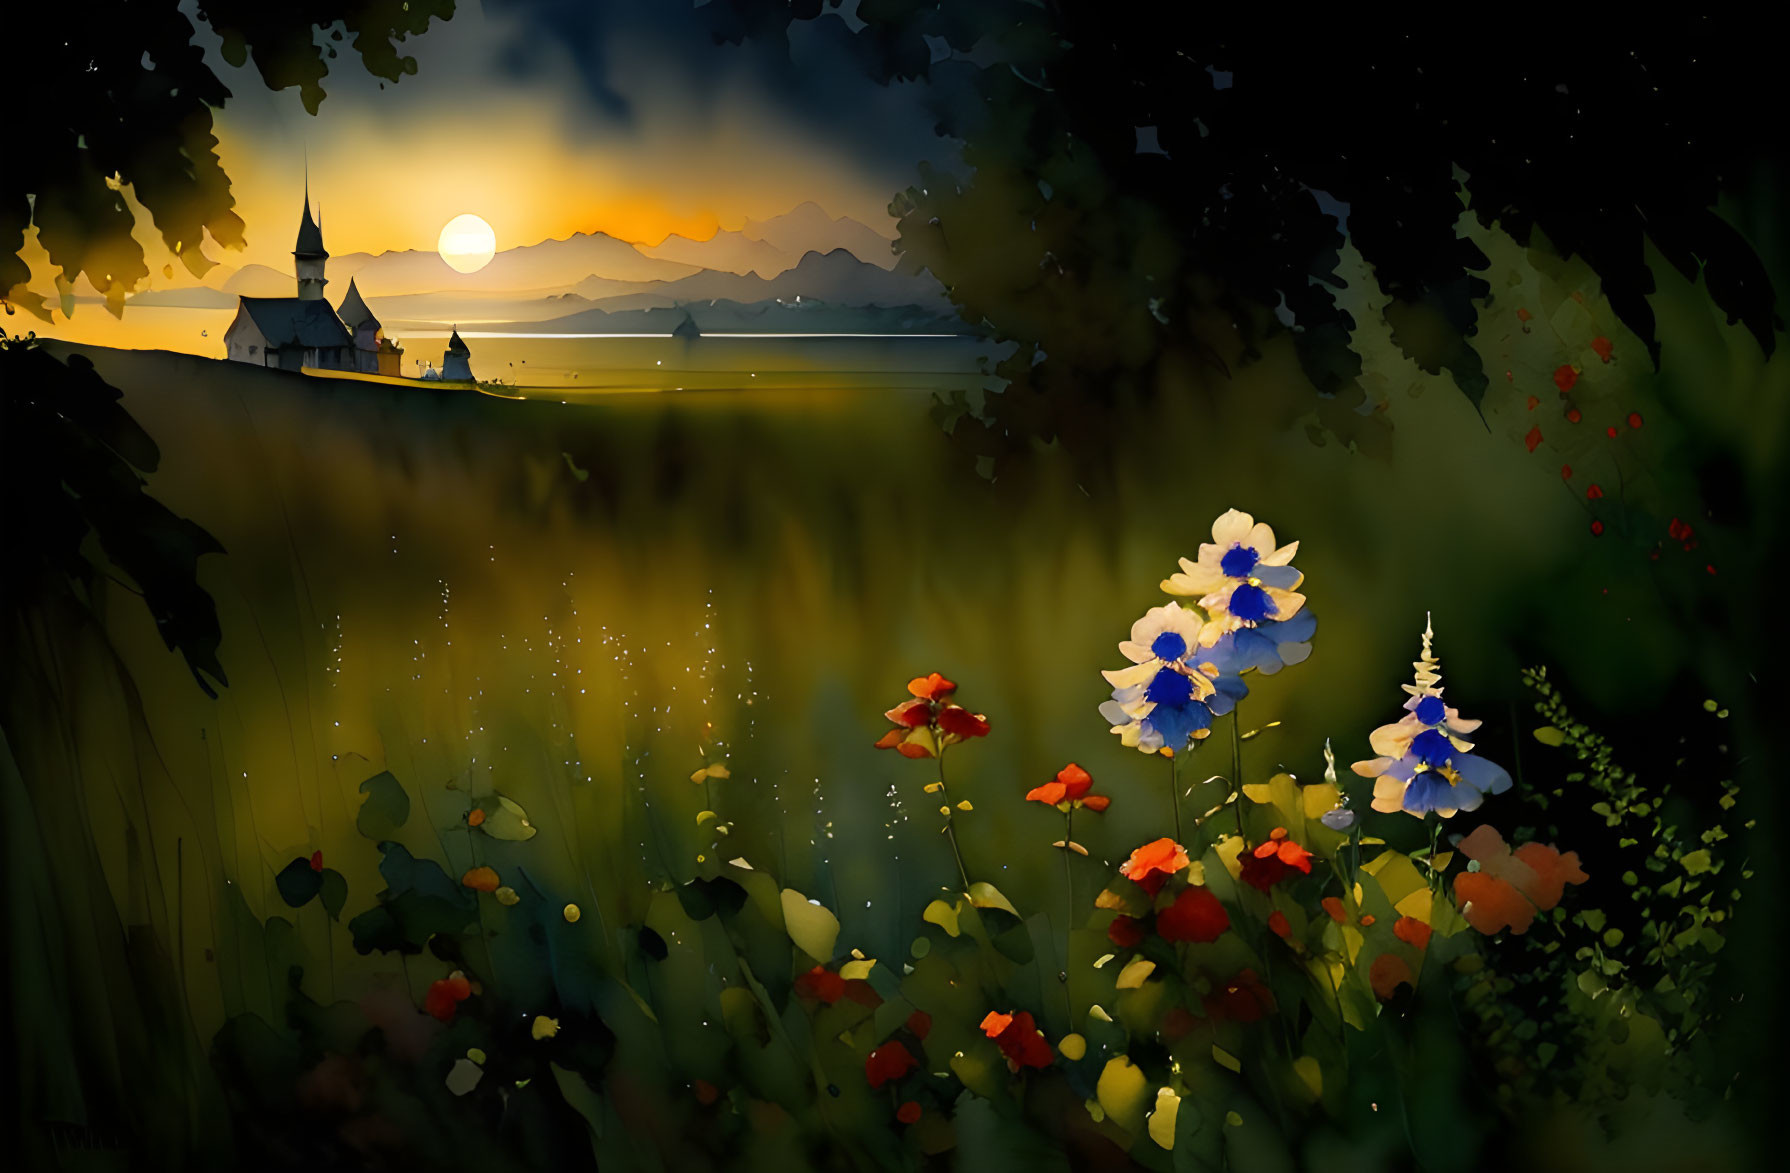 Scenic sunset landscape with church, mountains, and colorful flowers